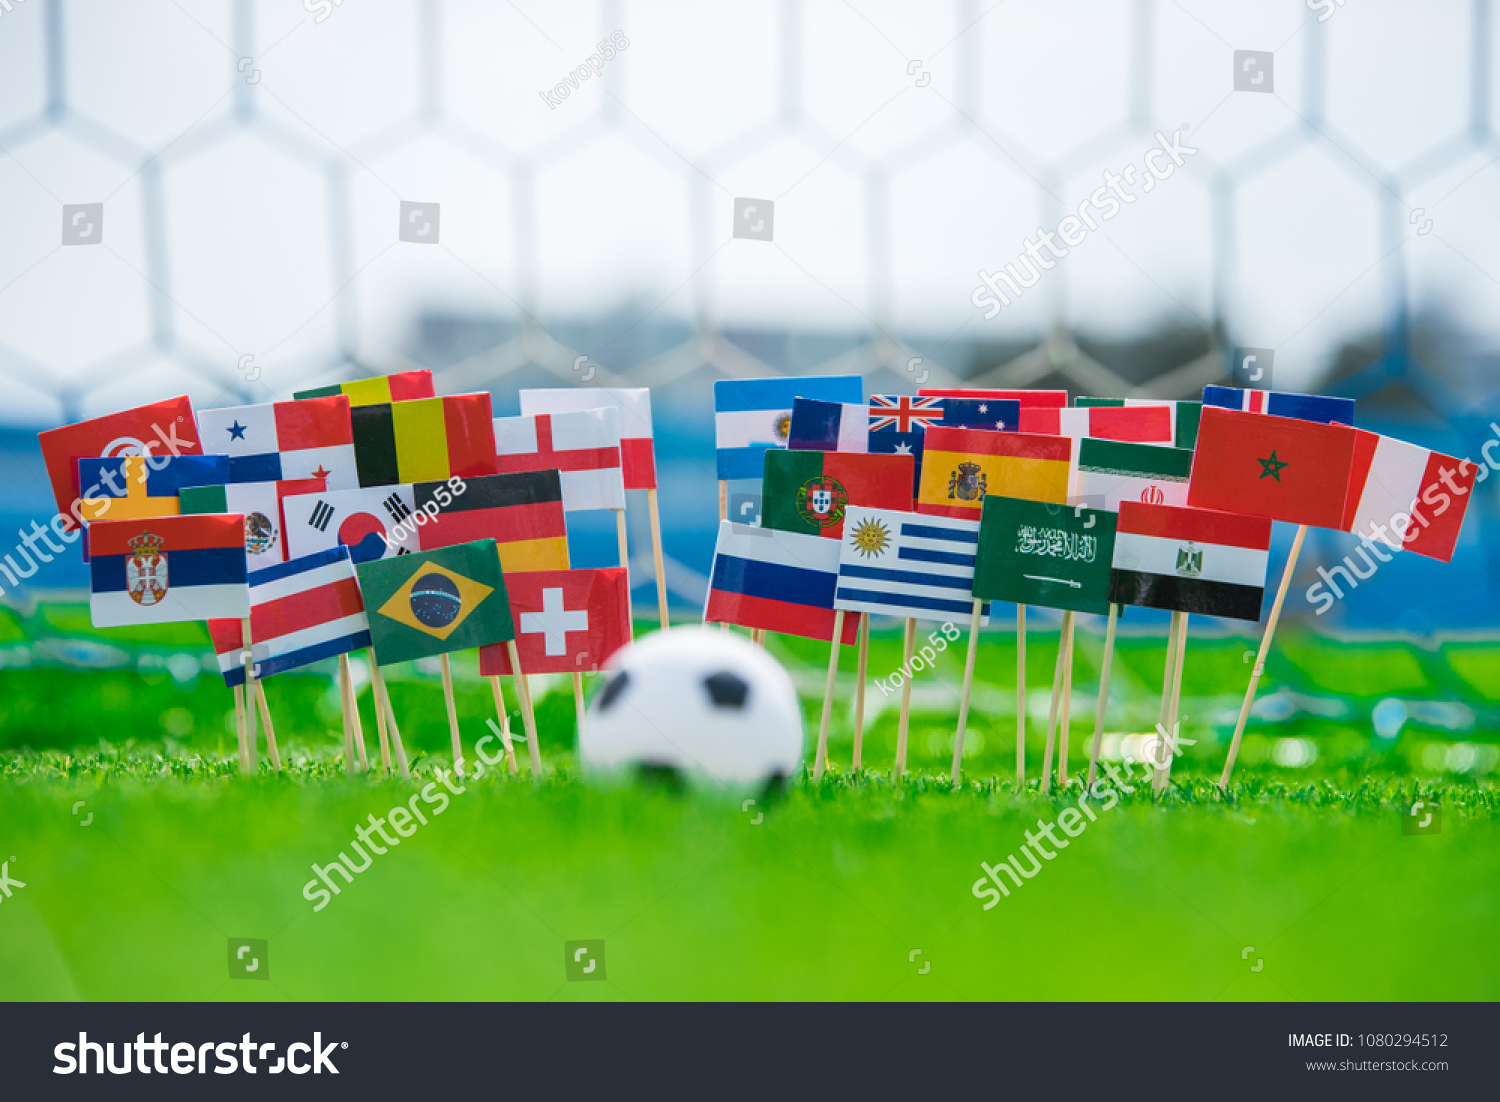 MOSCOW, RUSSIA - APRIL, 24, 2018: All nations flag of FIFA Football World Cup 2018 in Russia. Fans support concept photo. #1080294512